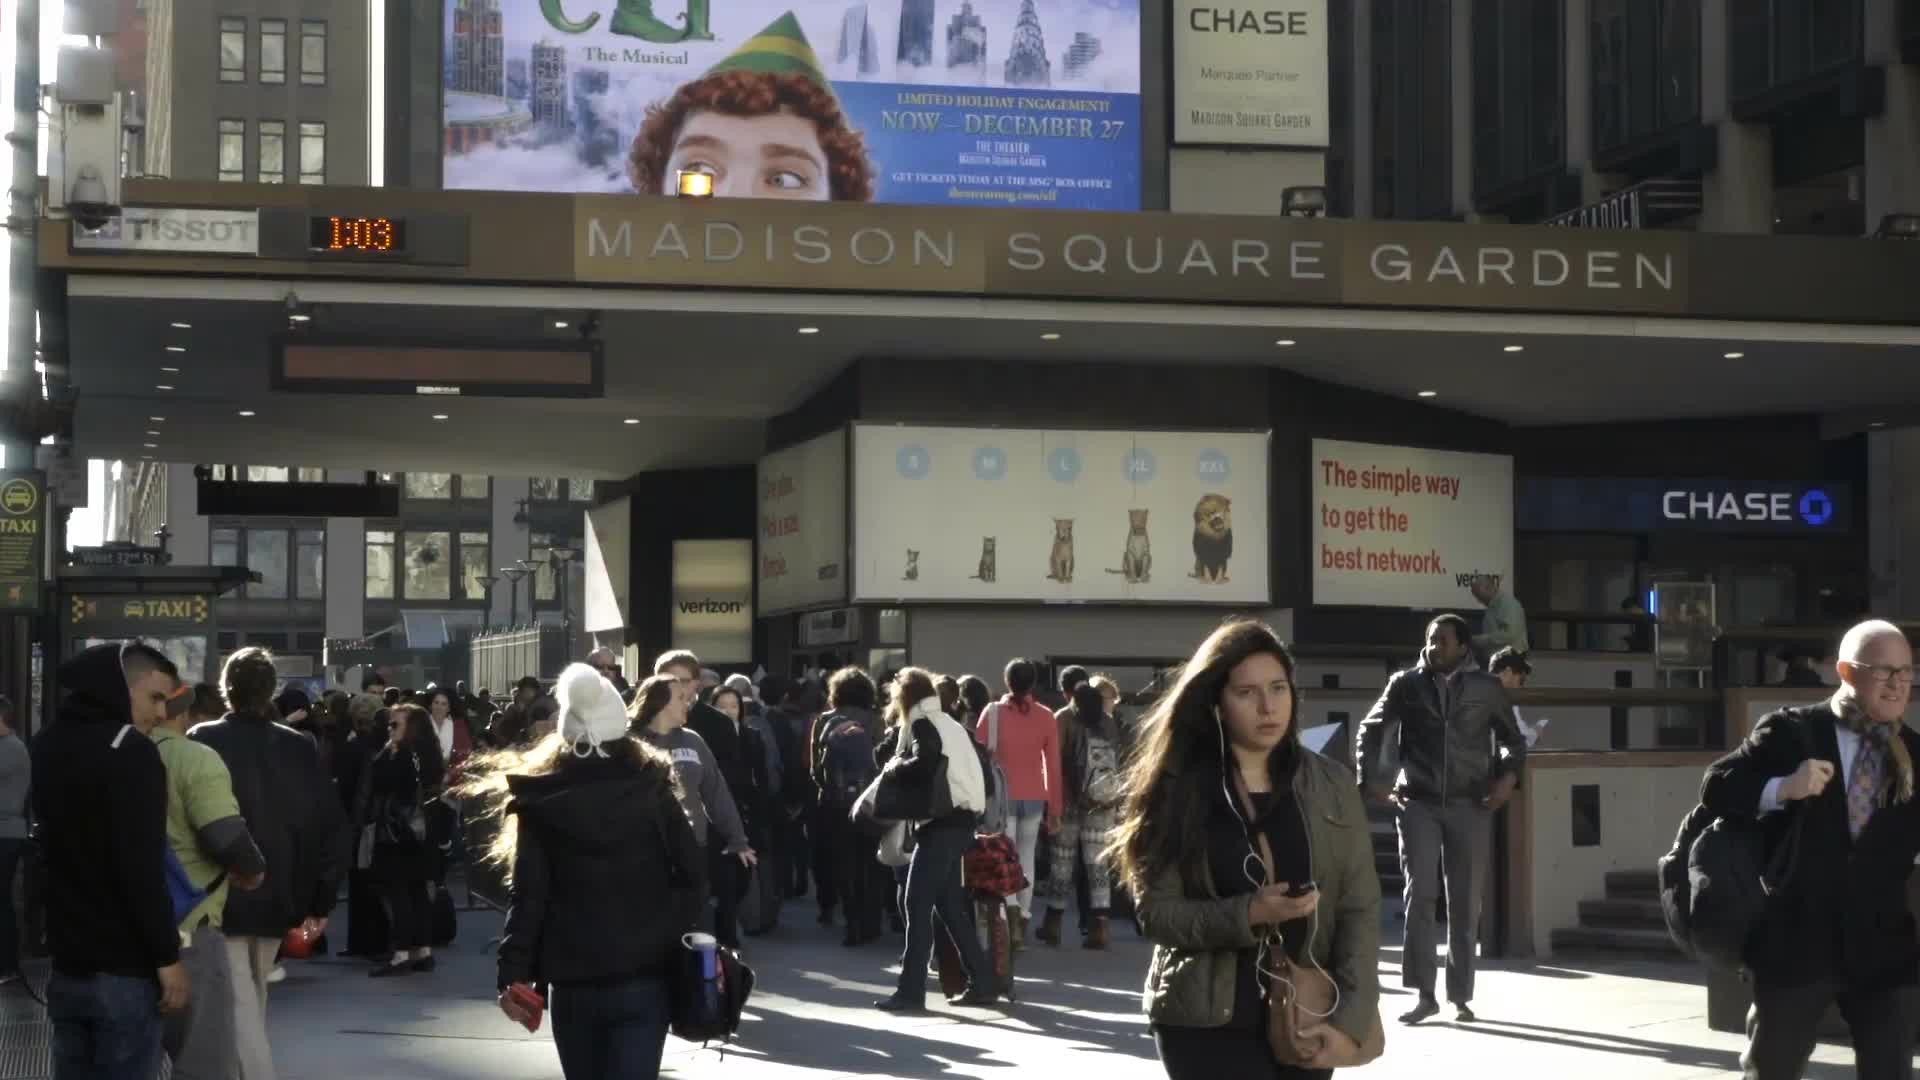 Madison Square Garden on bright sunny fall day - people walking outside in slow motion - woman on headphones in NYC